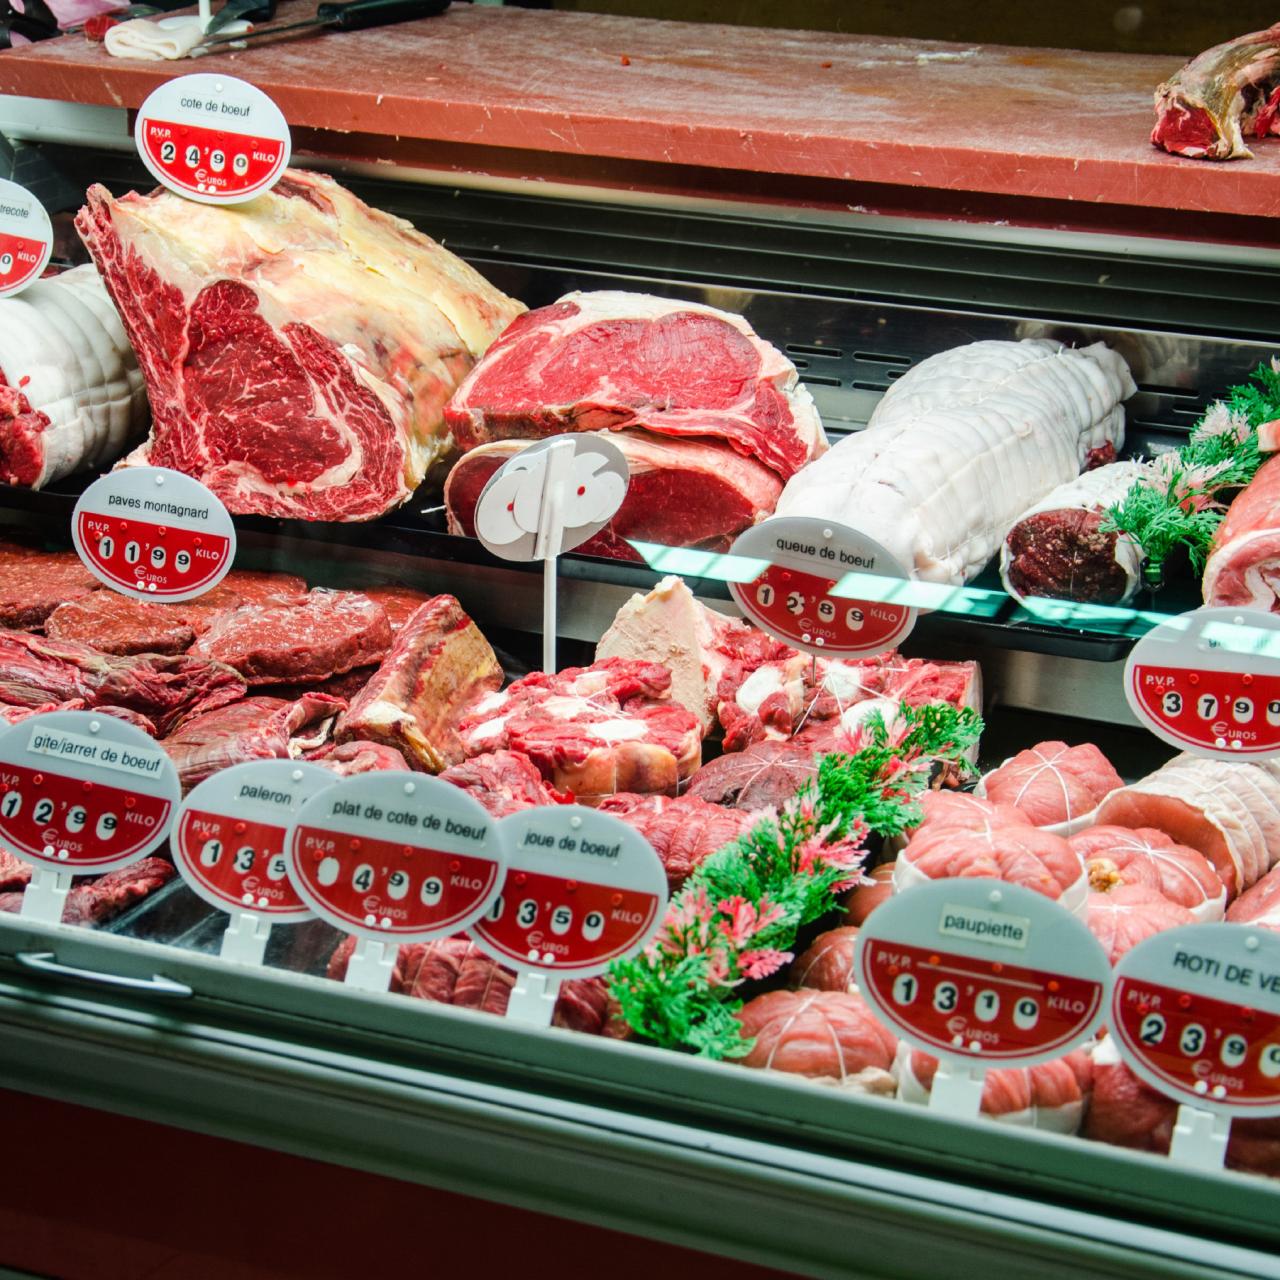 How to Buy the Freshest Meat and Seafood, Smart Shopping